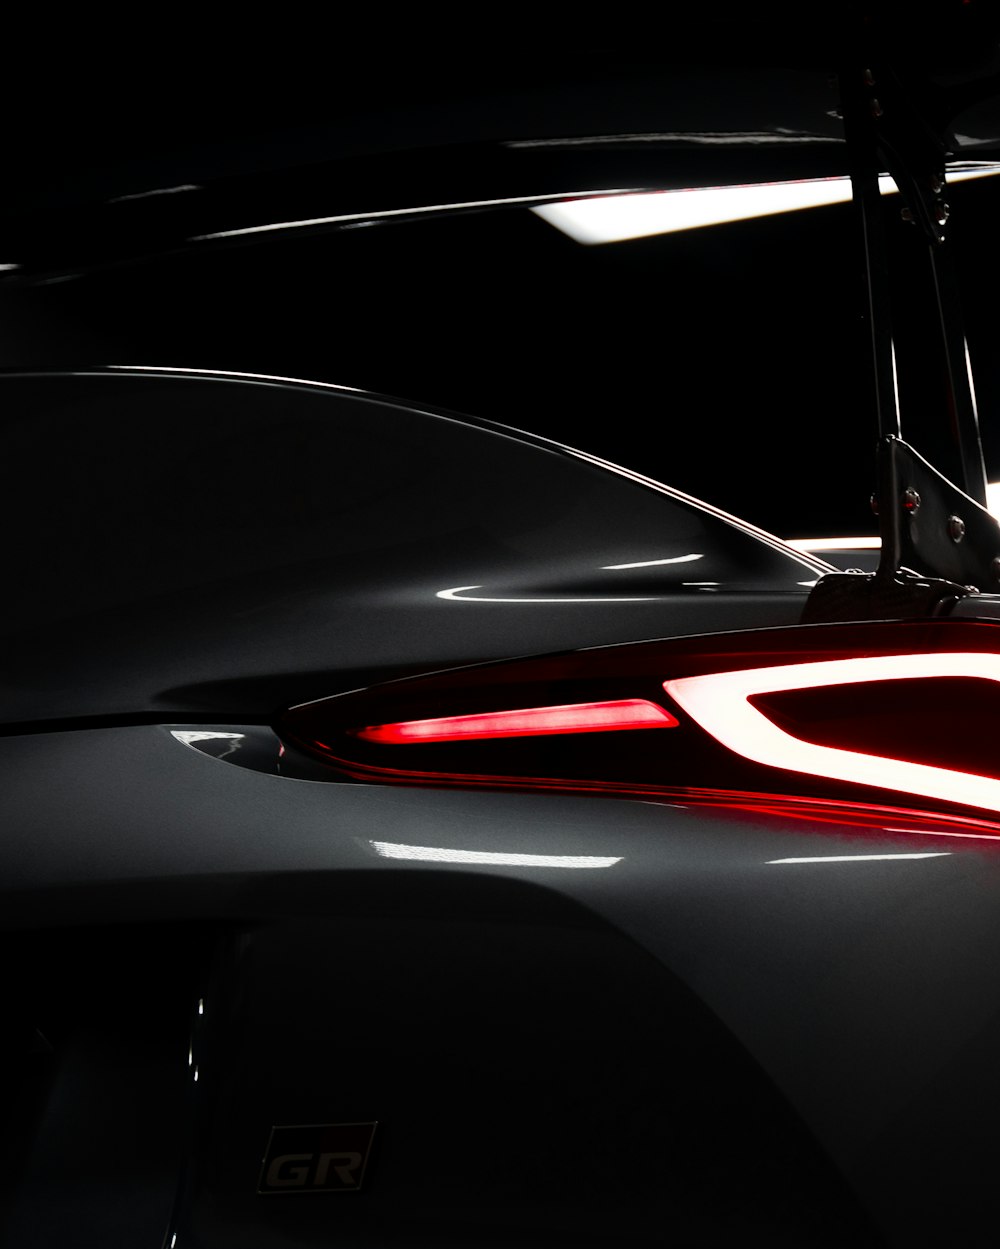 a close up of the tail lights of a sports car